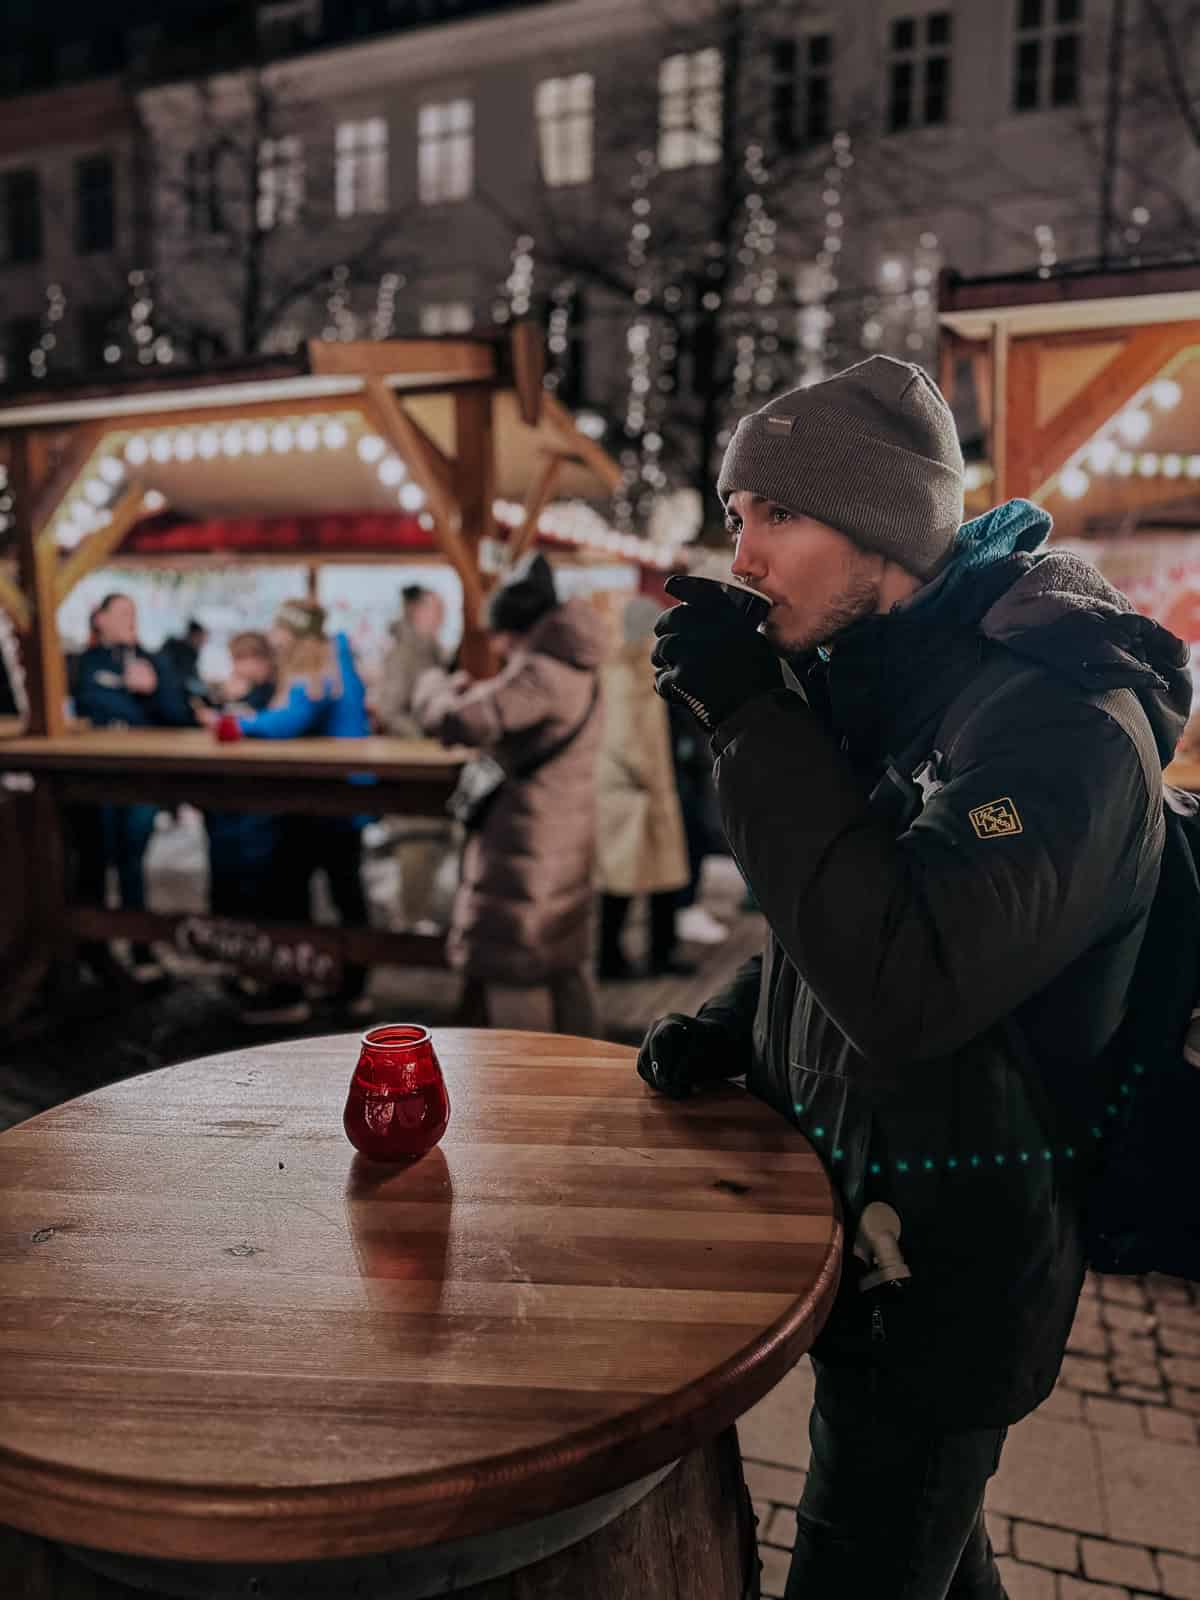 A man in winter attire drinks from a cup at a Christmas market, standing next to a wooden table with a red candle holder, with festive booths and sparkling lights in the background.